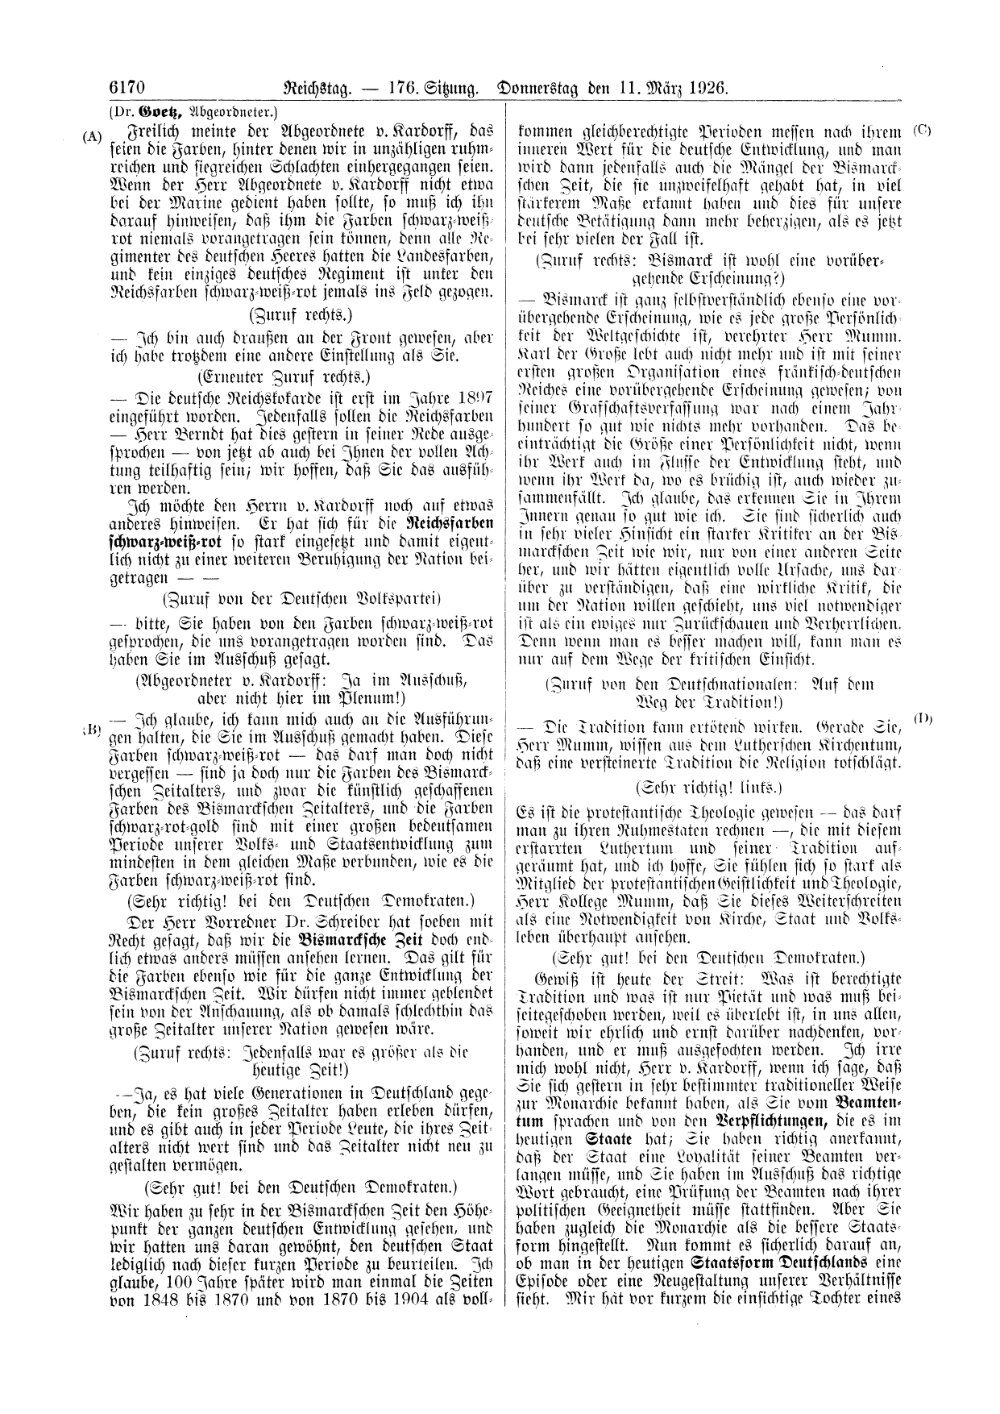 Scan of page 6170